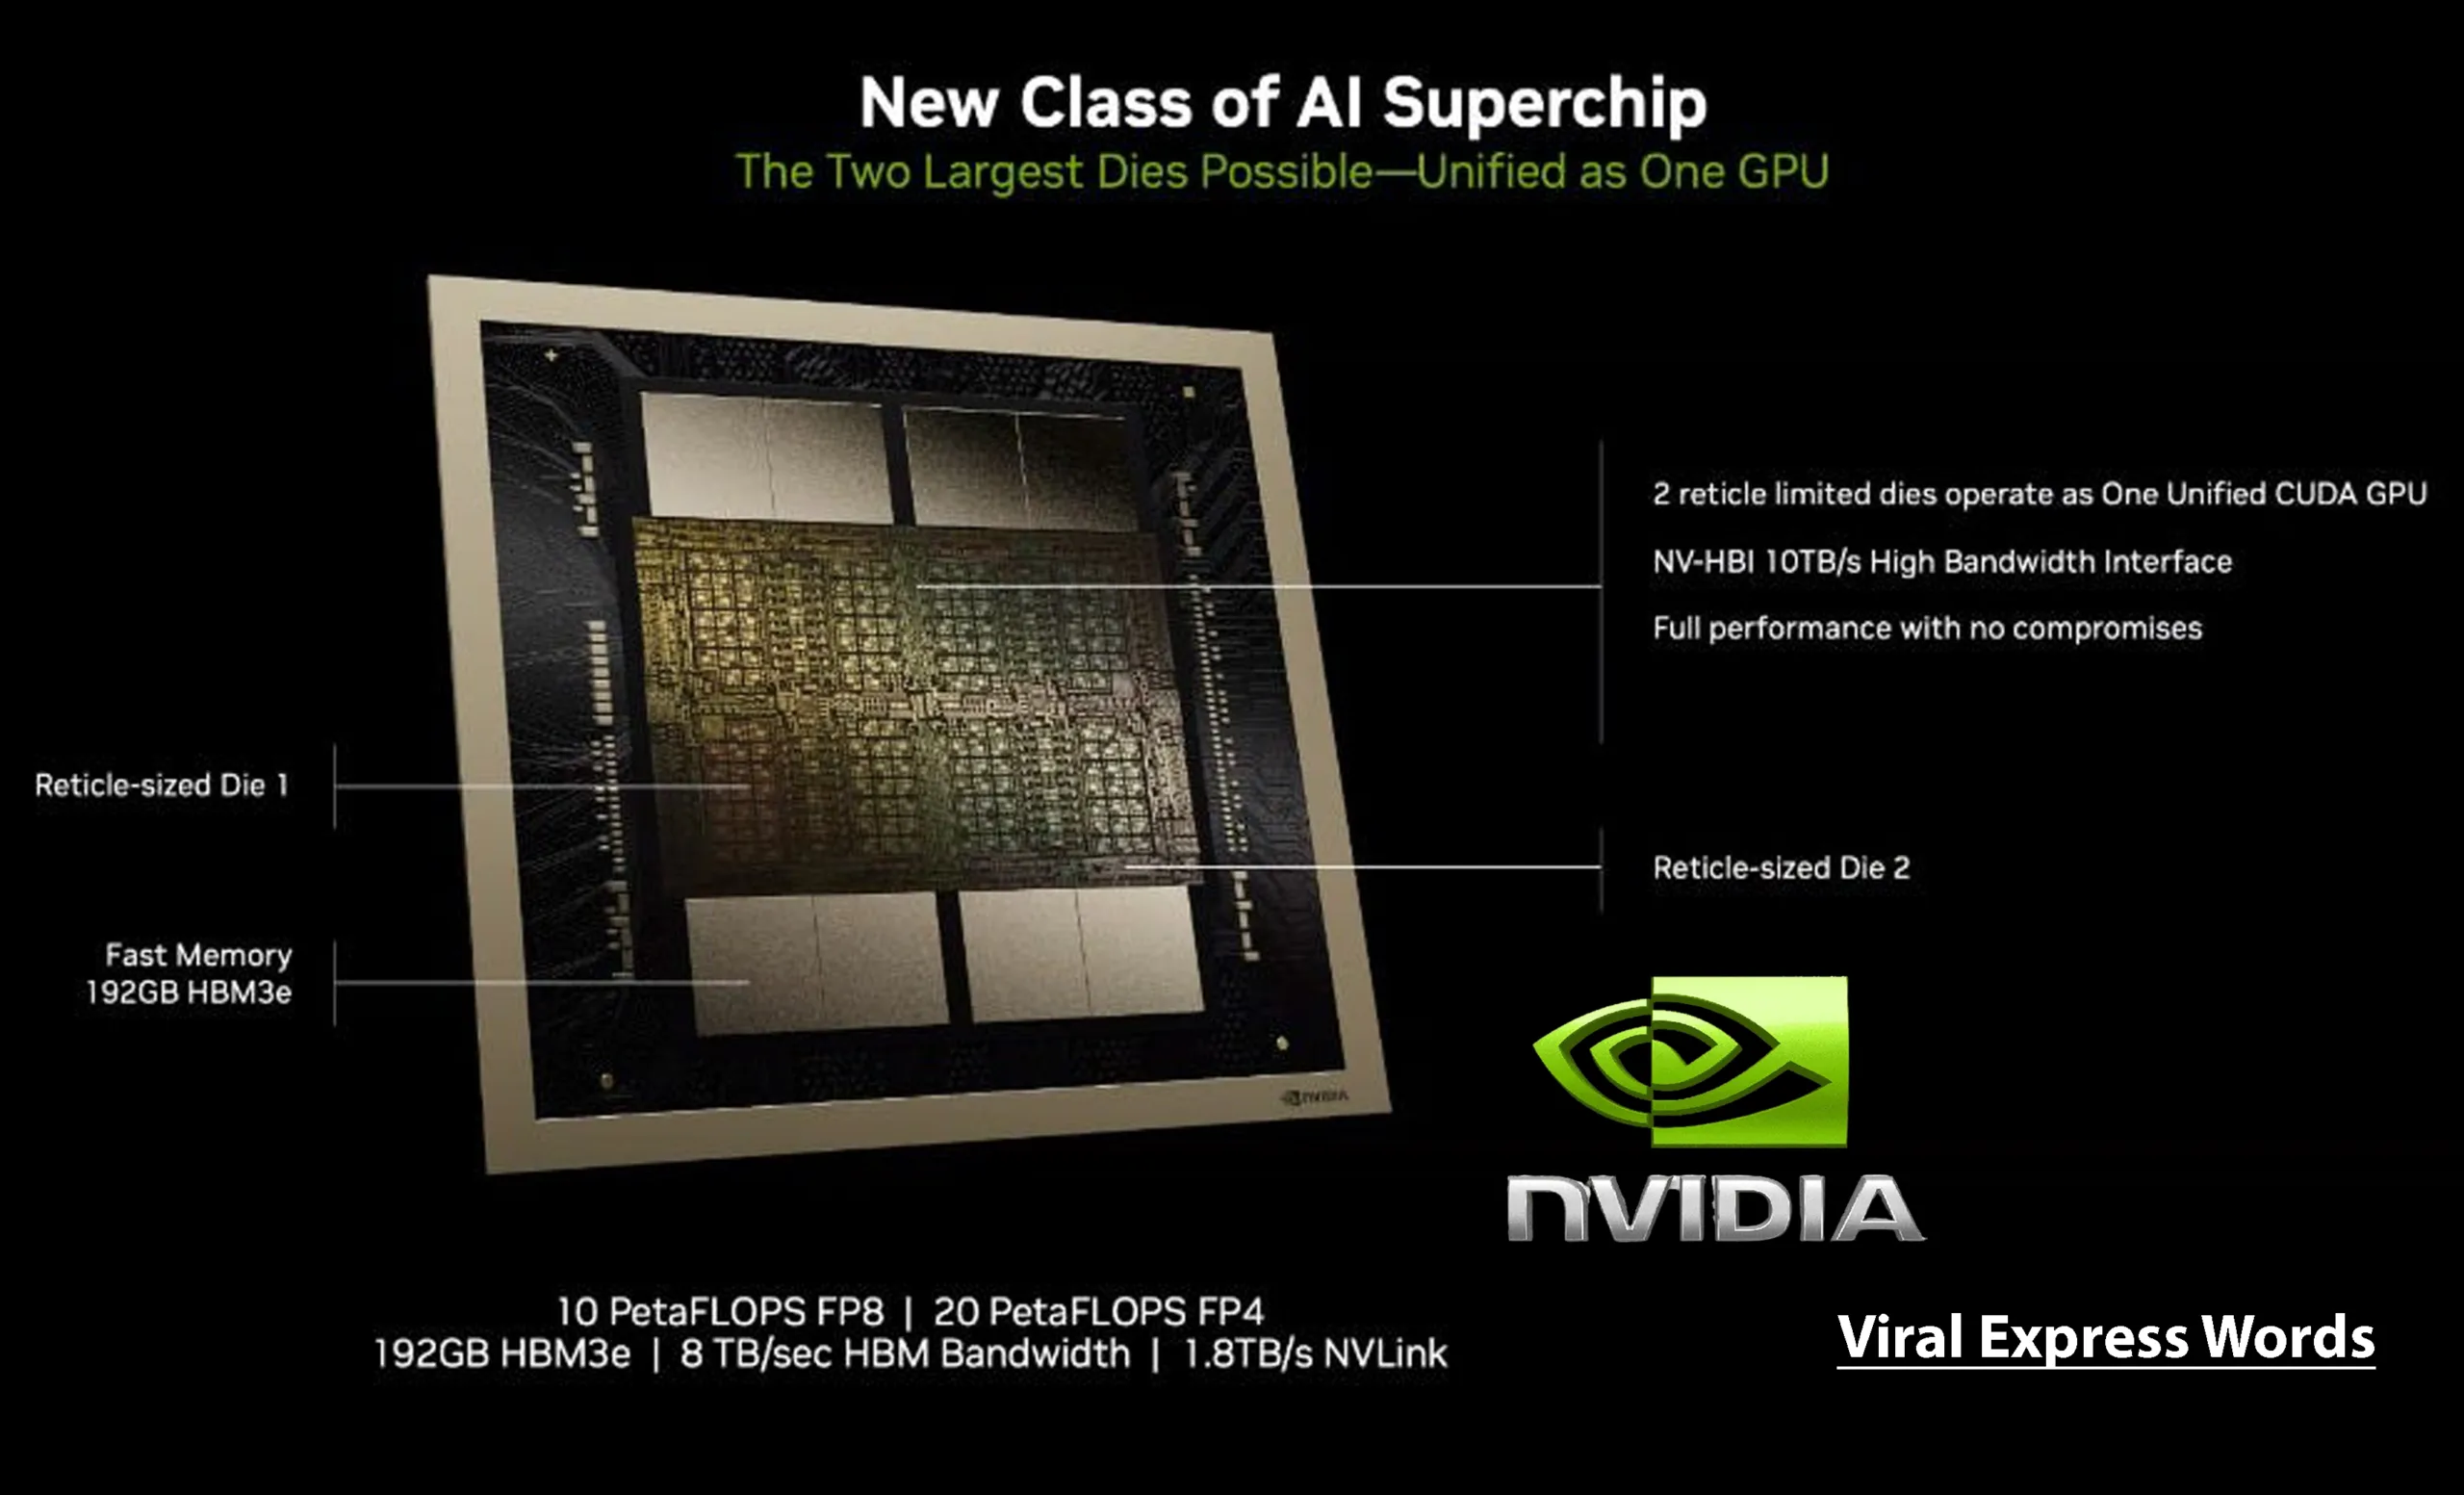 Image: Nvidia's new Blackwell AI chip, symbolizing the company's advancements in artificial intelligence technology